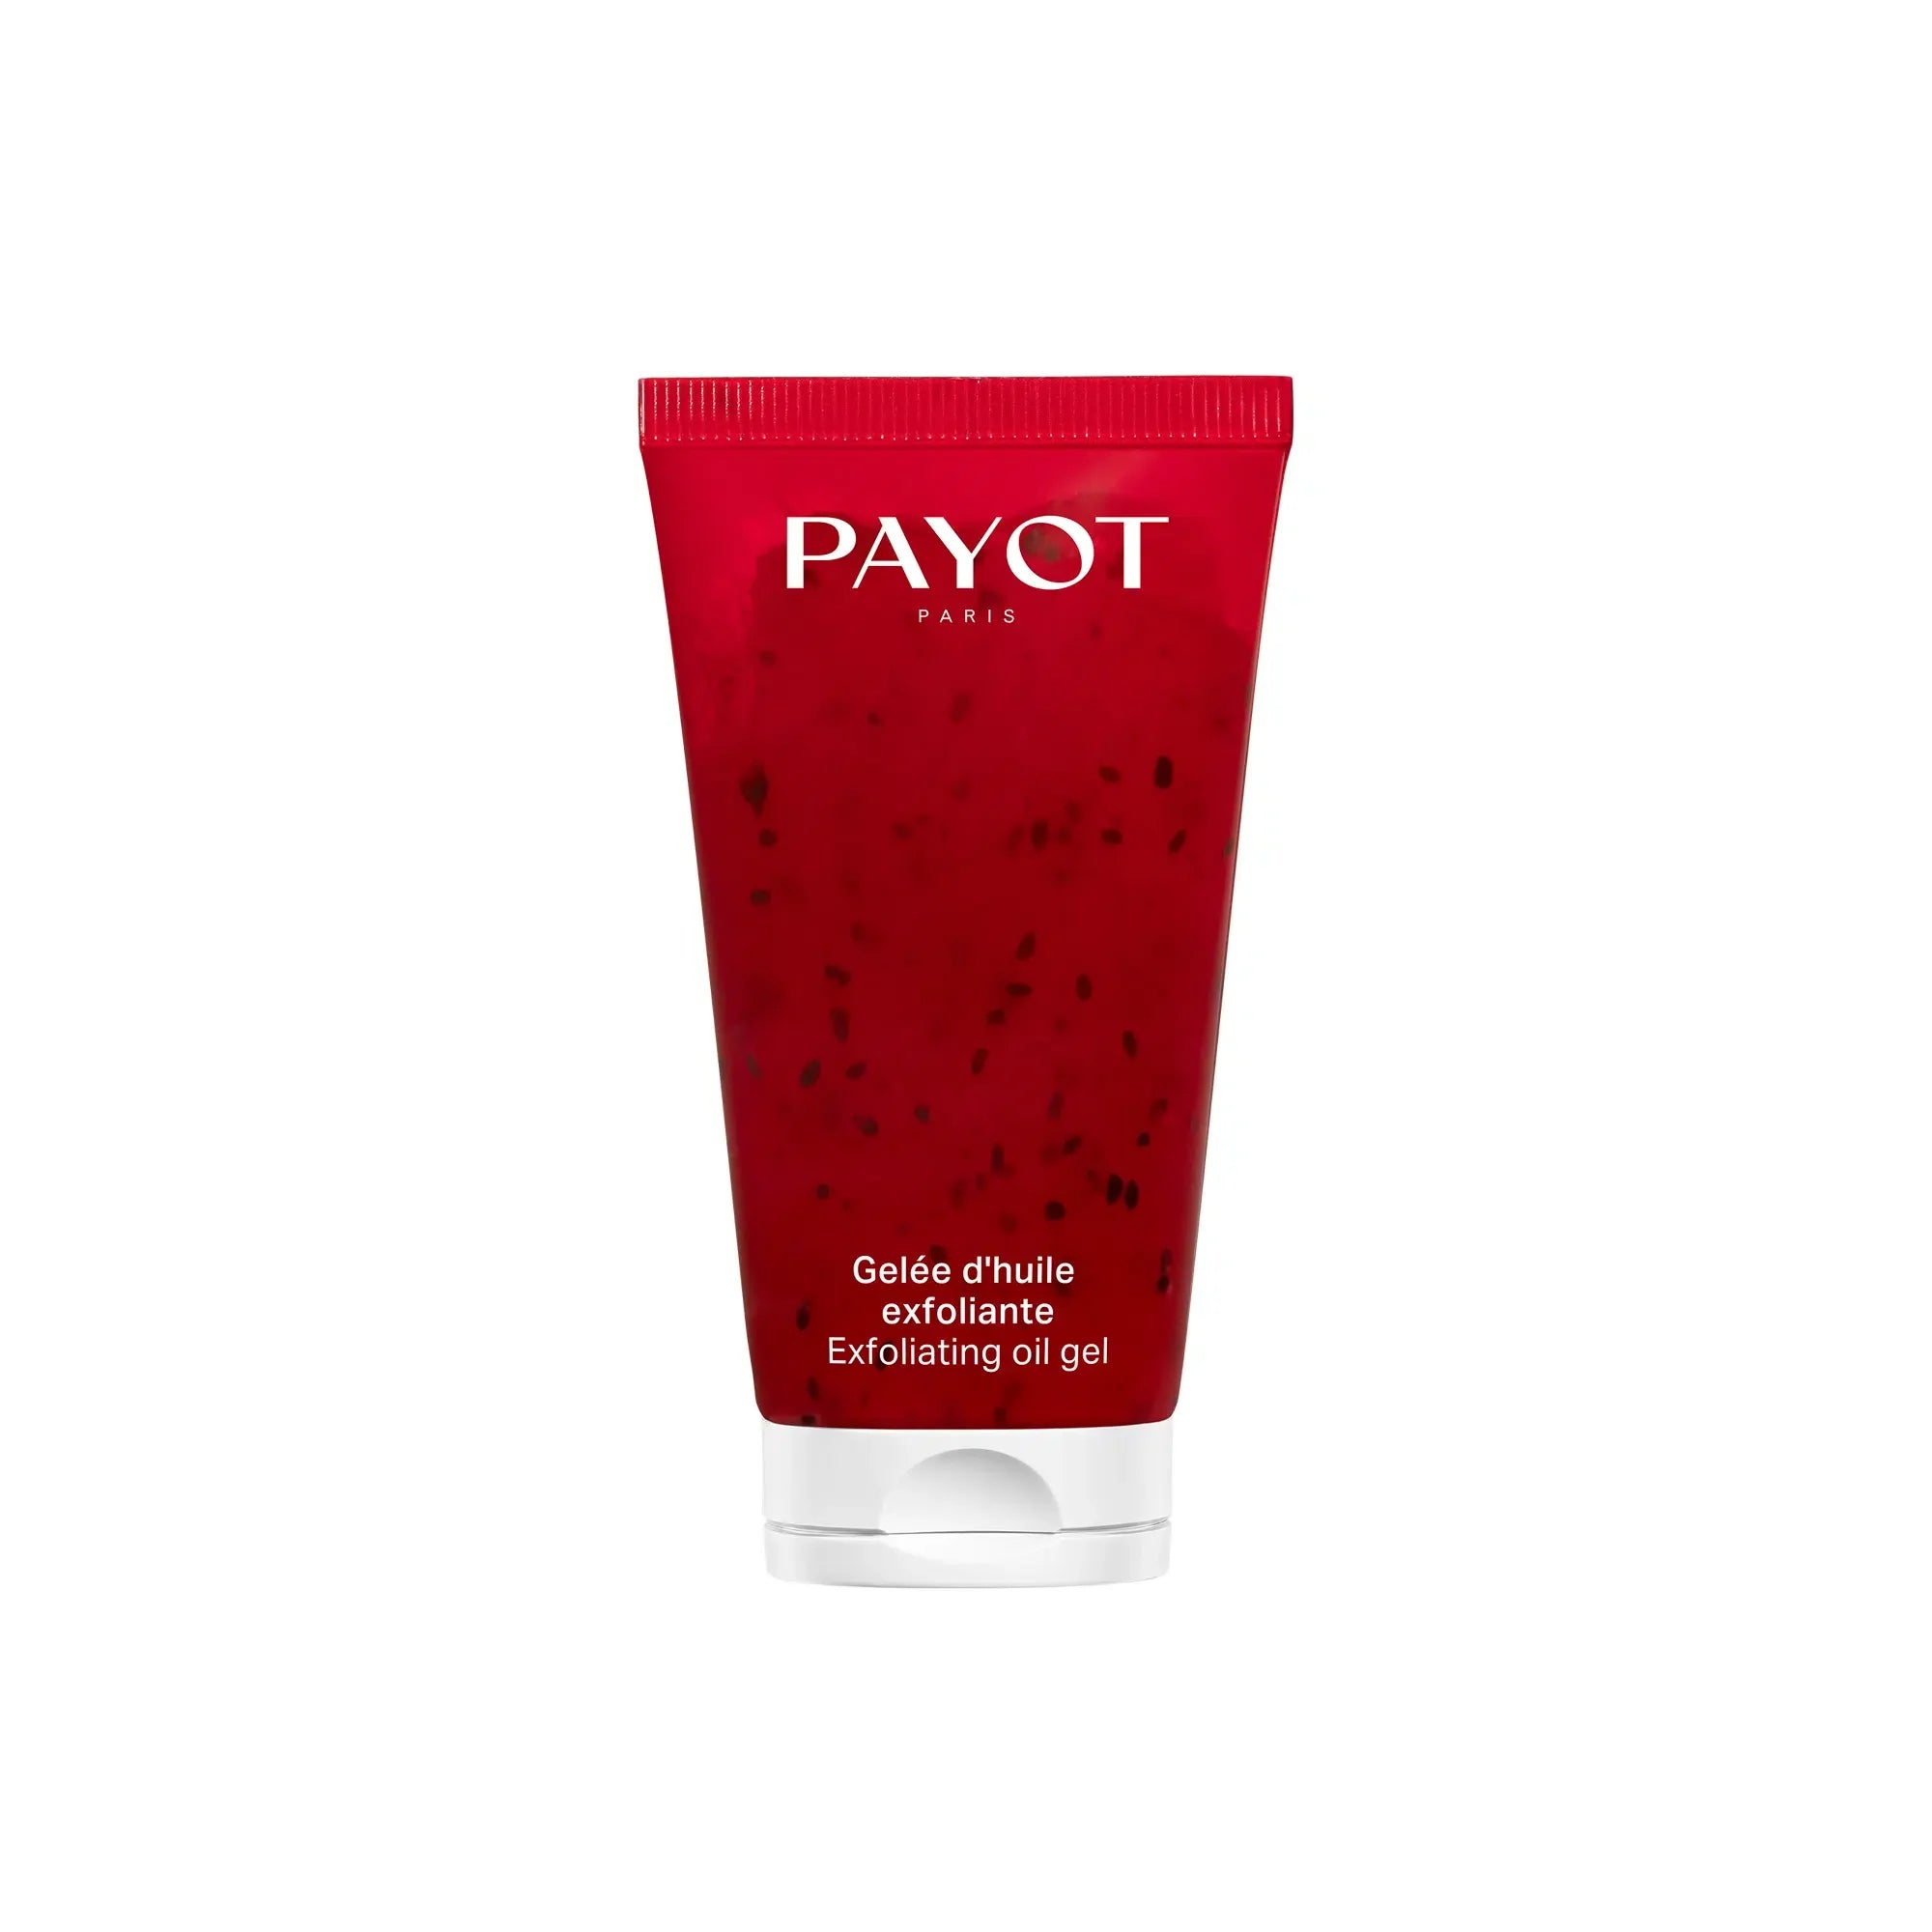 Payot NUE Gelee D'Huile Exfoliant 2ml sample